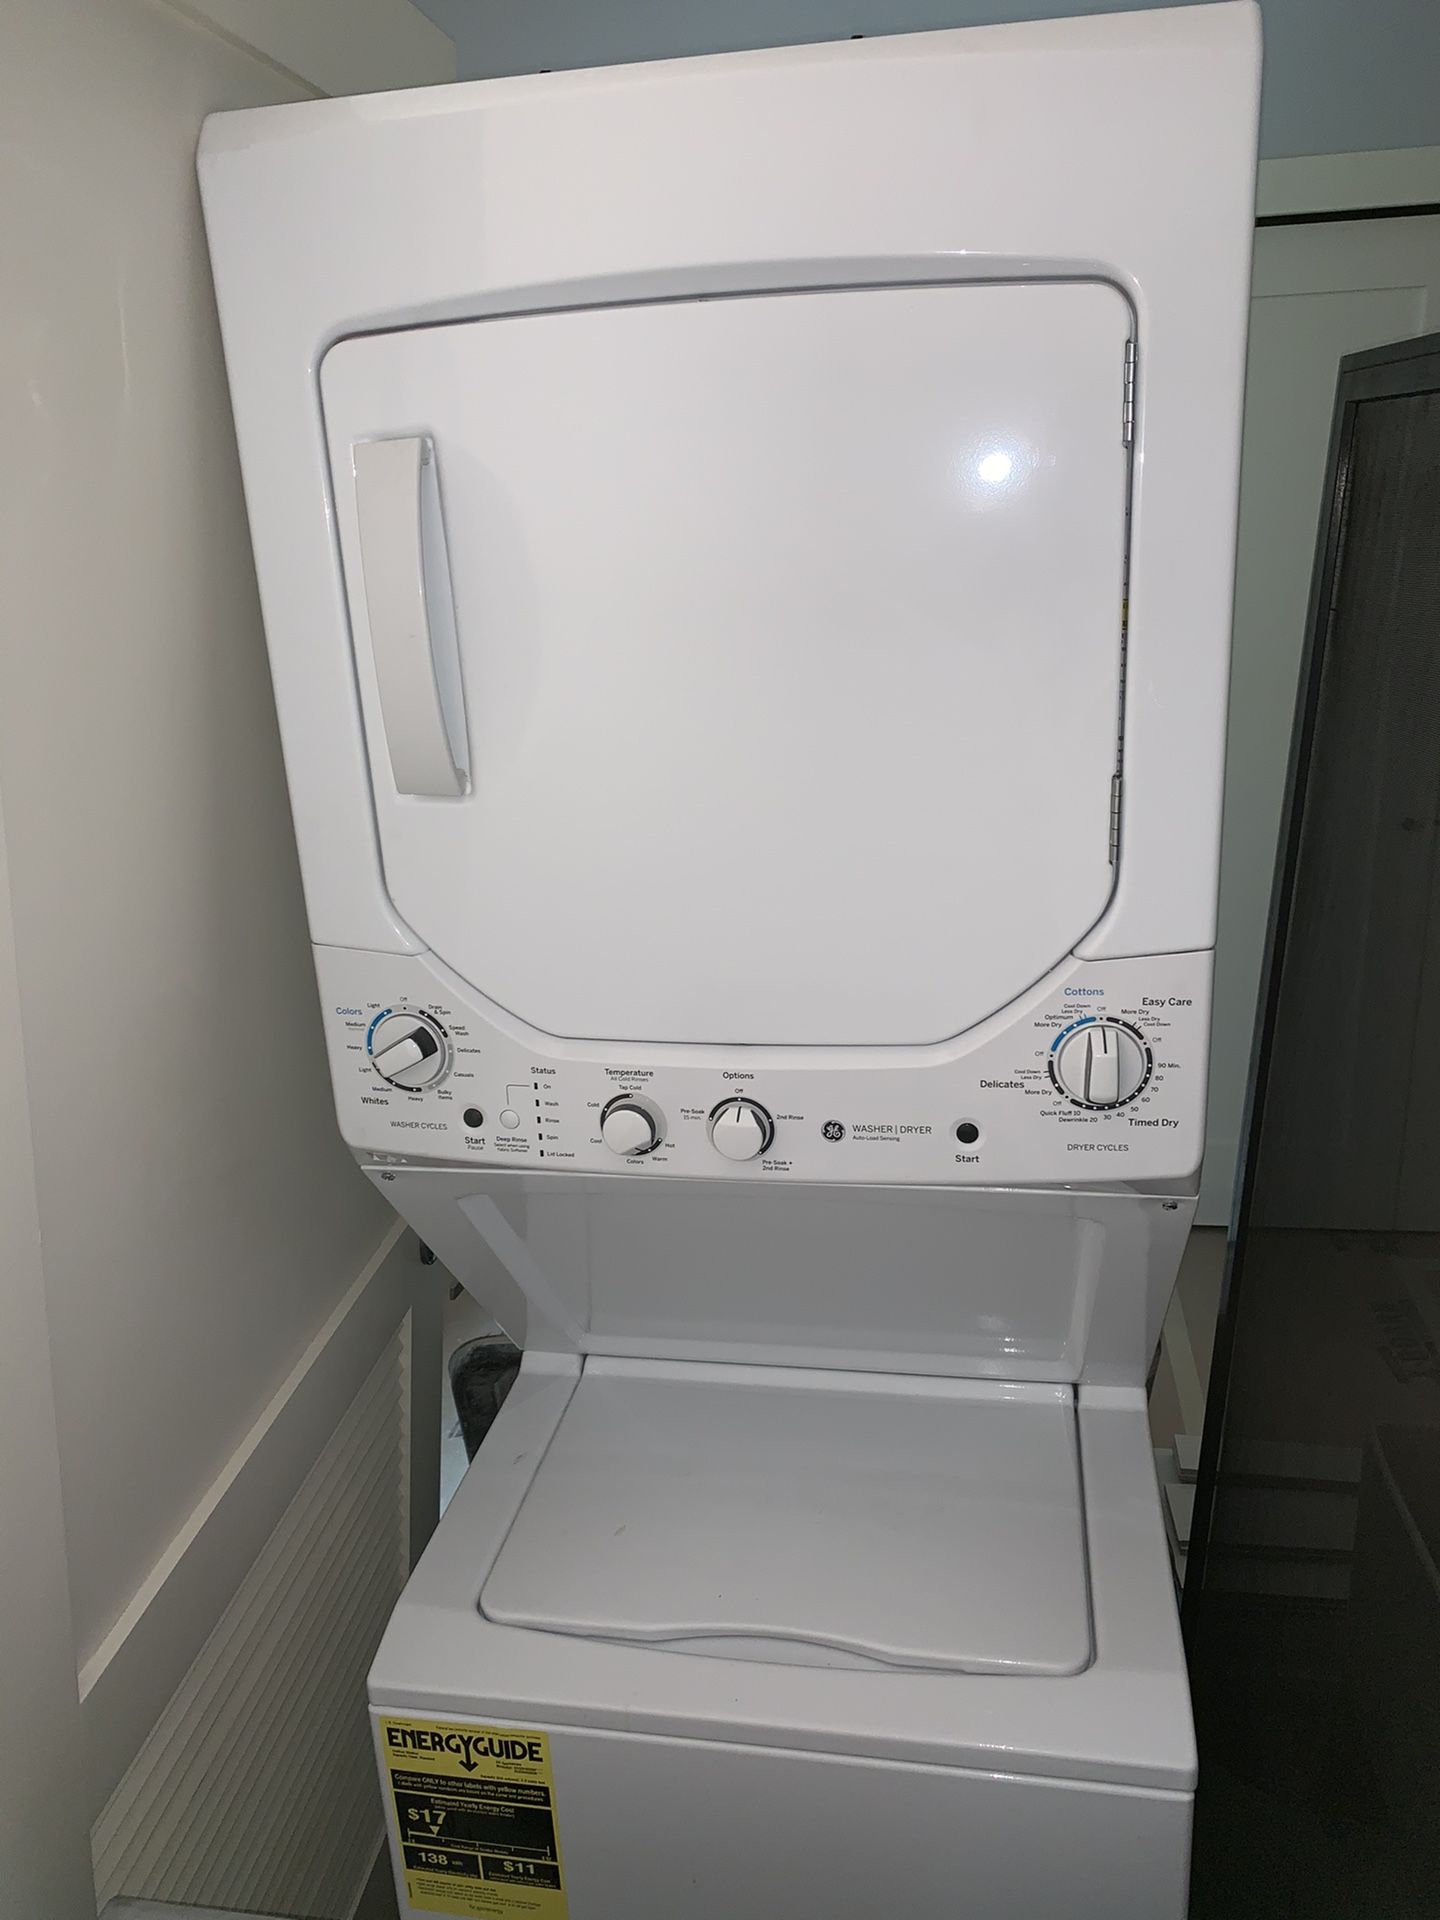 GE washer dryer combo